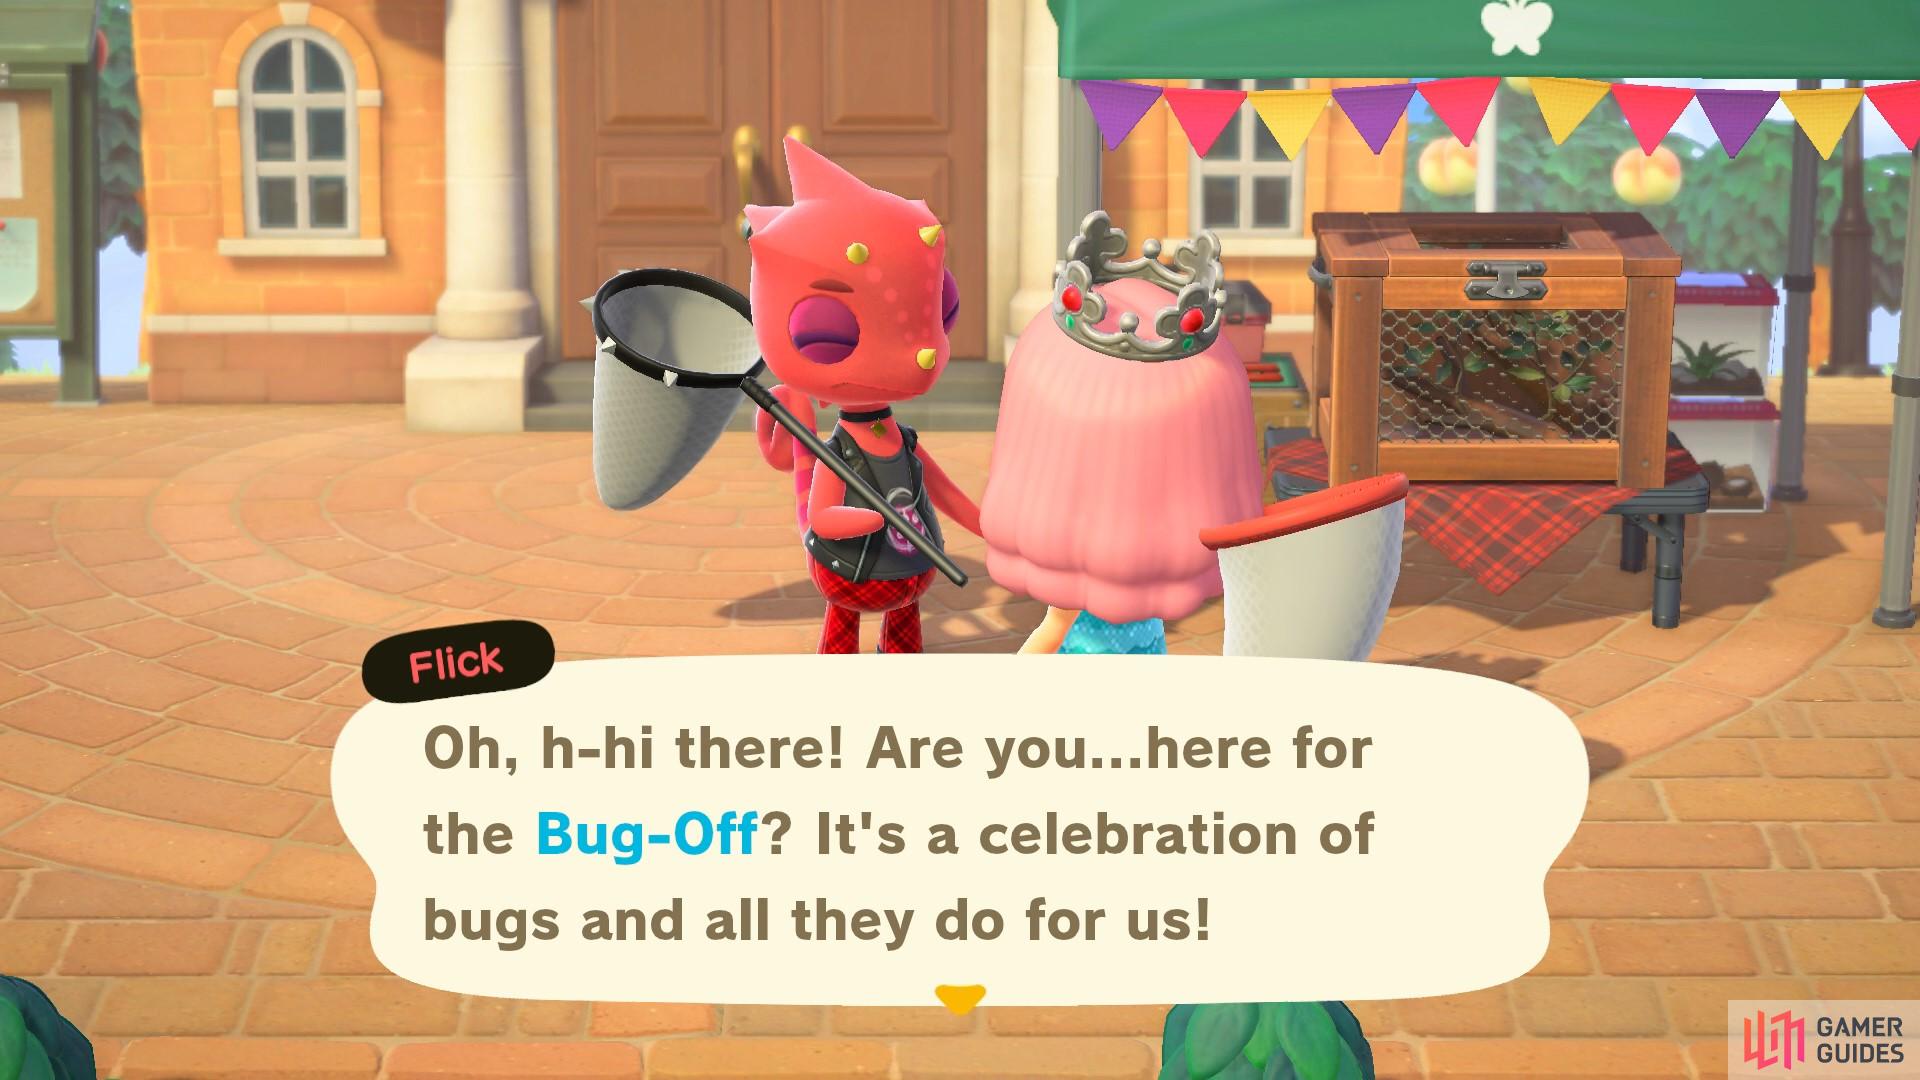 Bug-Offs are summer events.